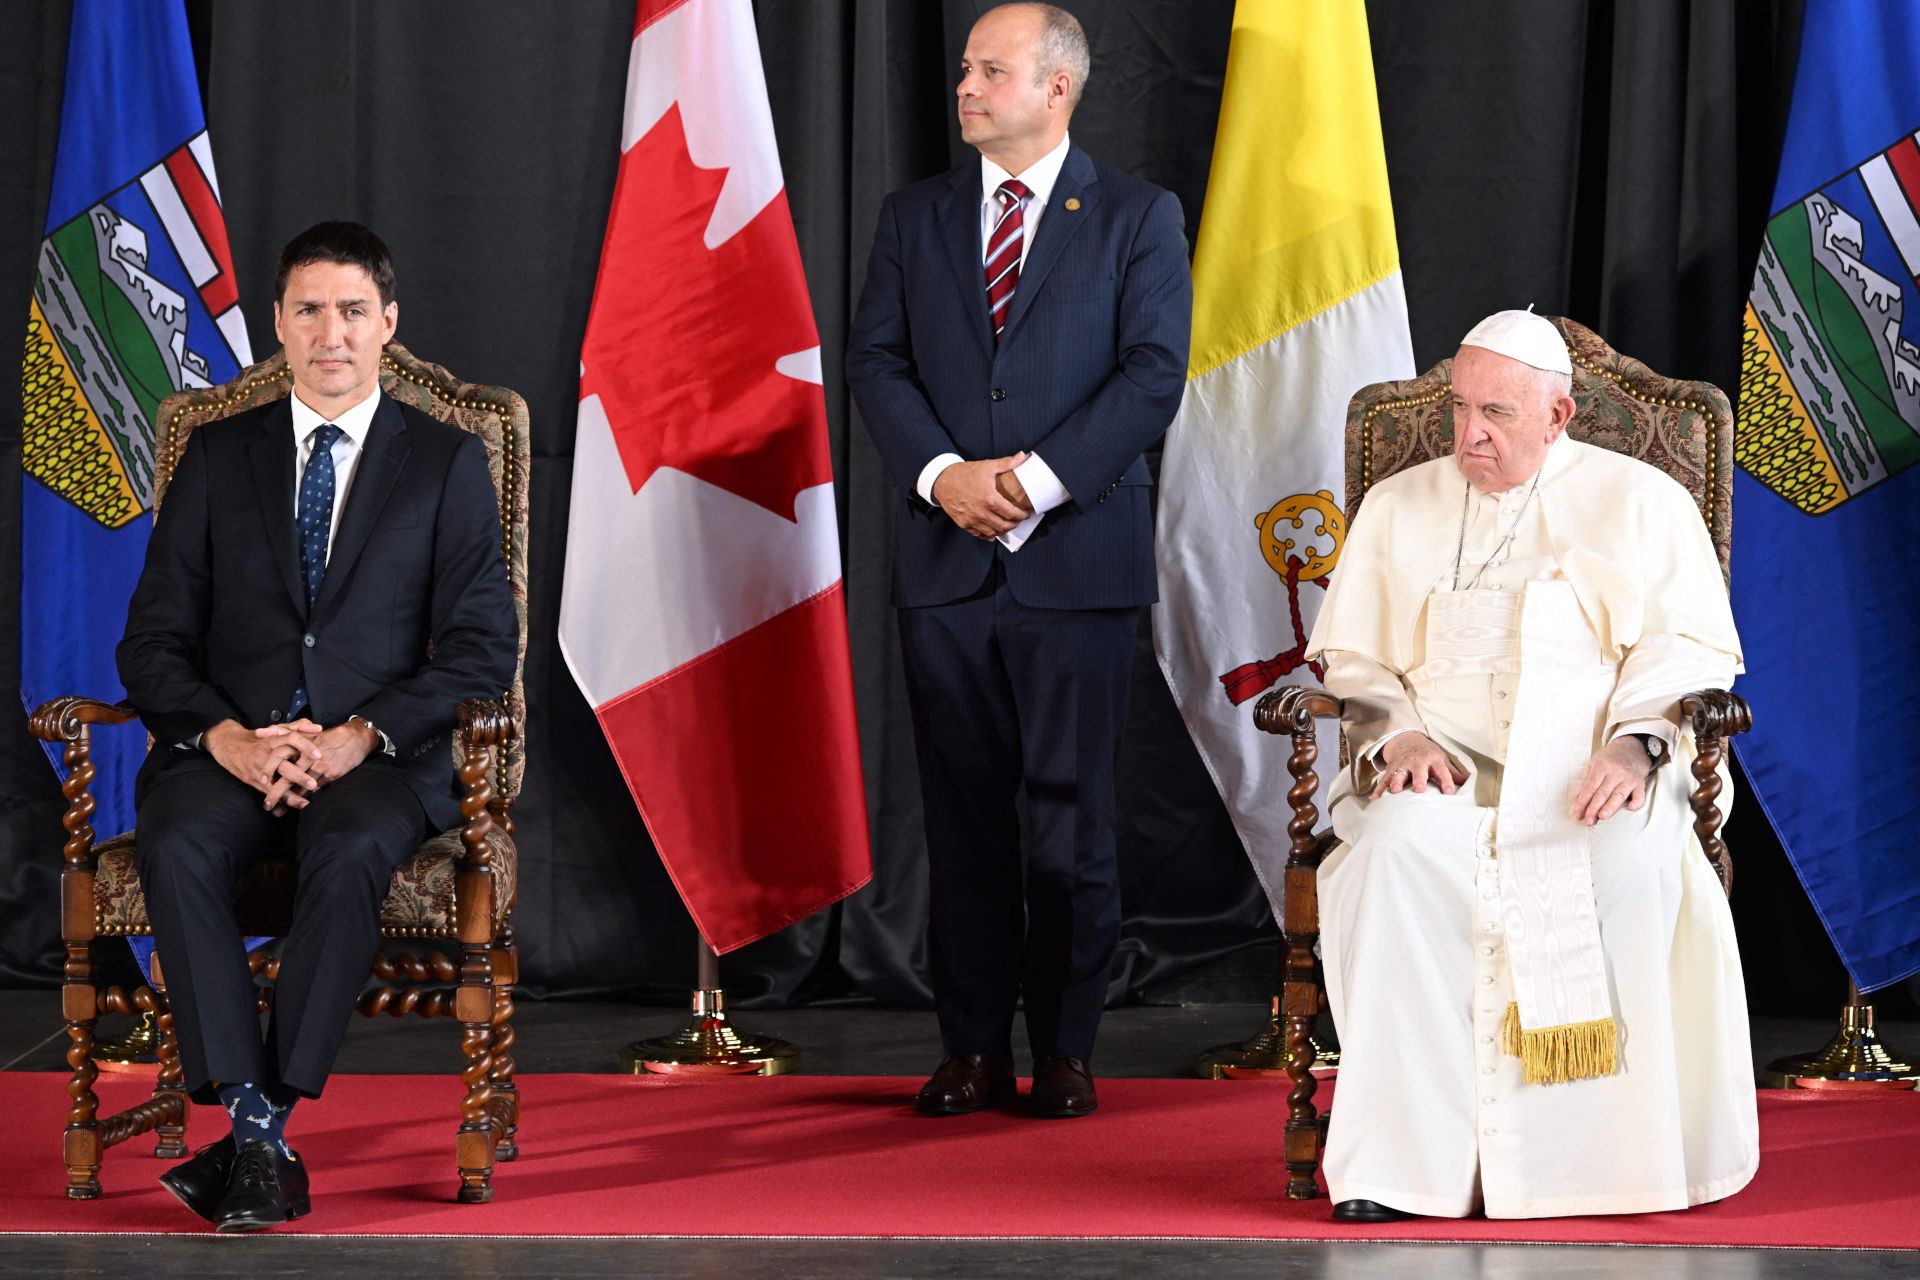 Pope Francis’s Apology to Canada’s Indigenous Peoples